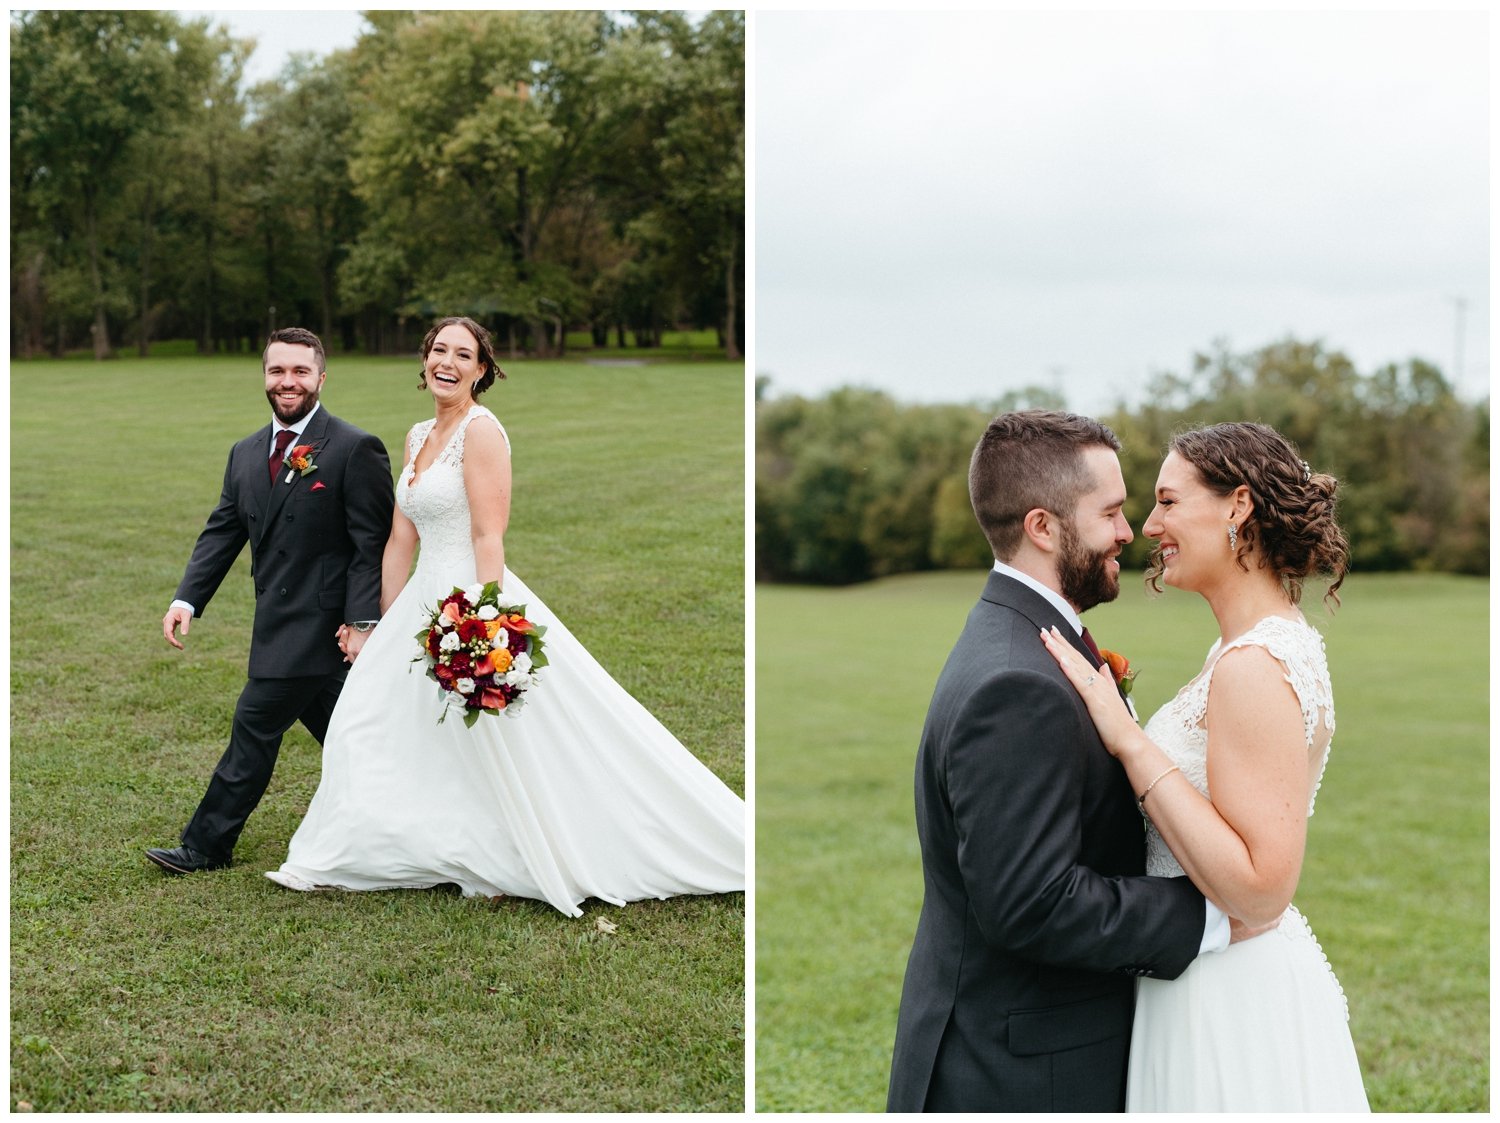 The couple walks across a wide grassy lawn before their intimate destination wedding